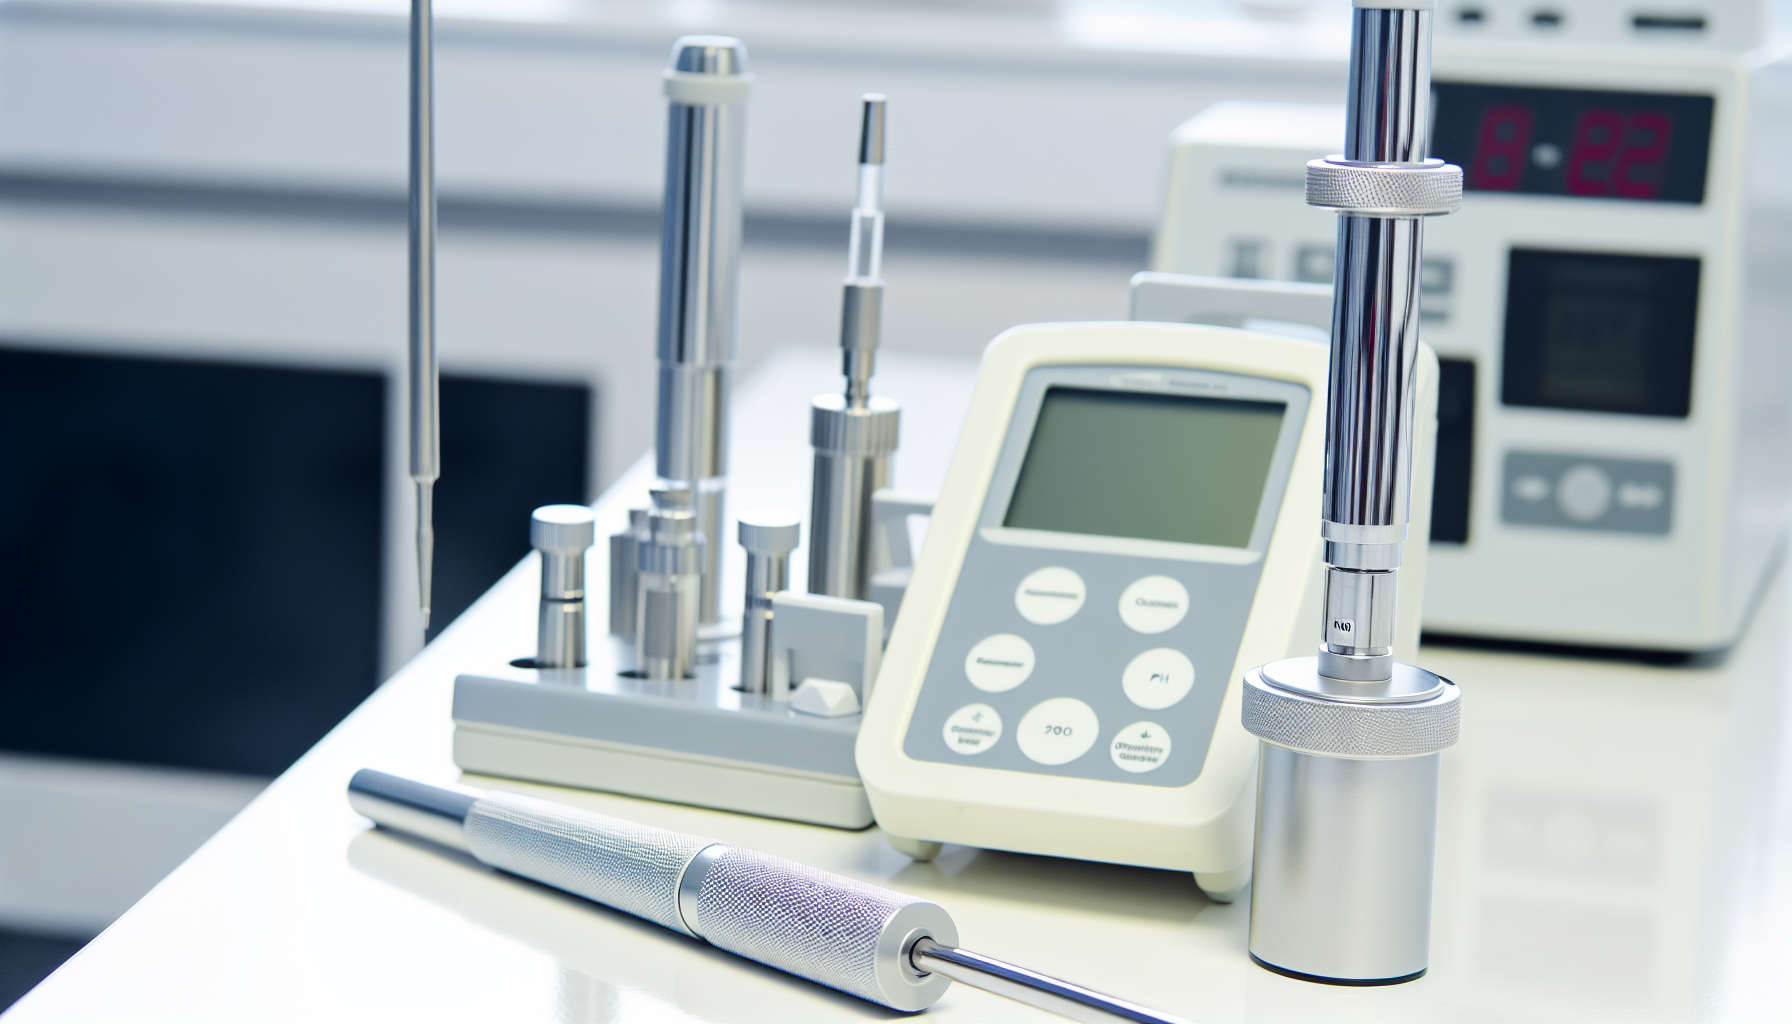 Quality control tools for compound integrity